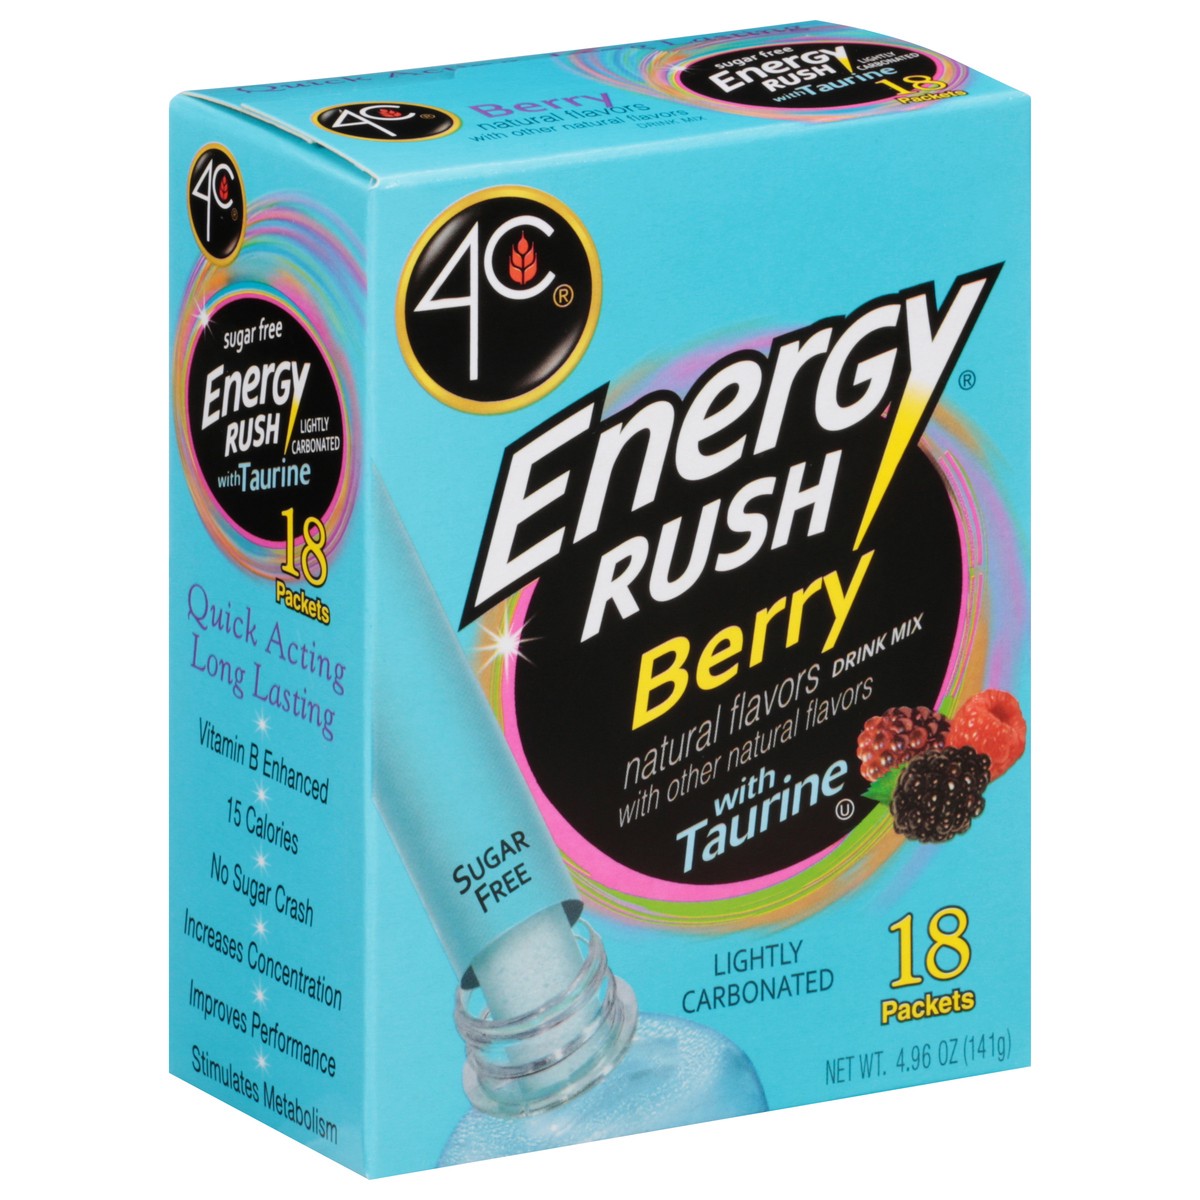 slide 8 of 14, 4C Drink Mix Sgr/Free Energy Rush Be, 18/4.96